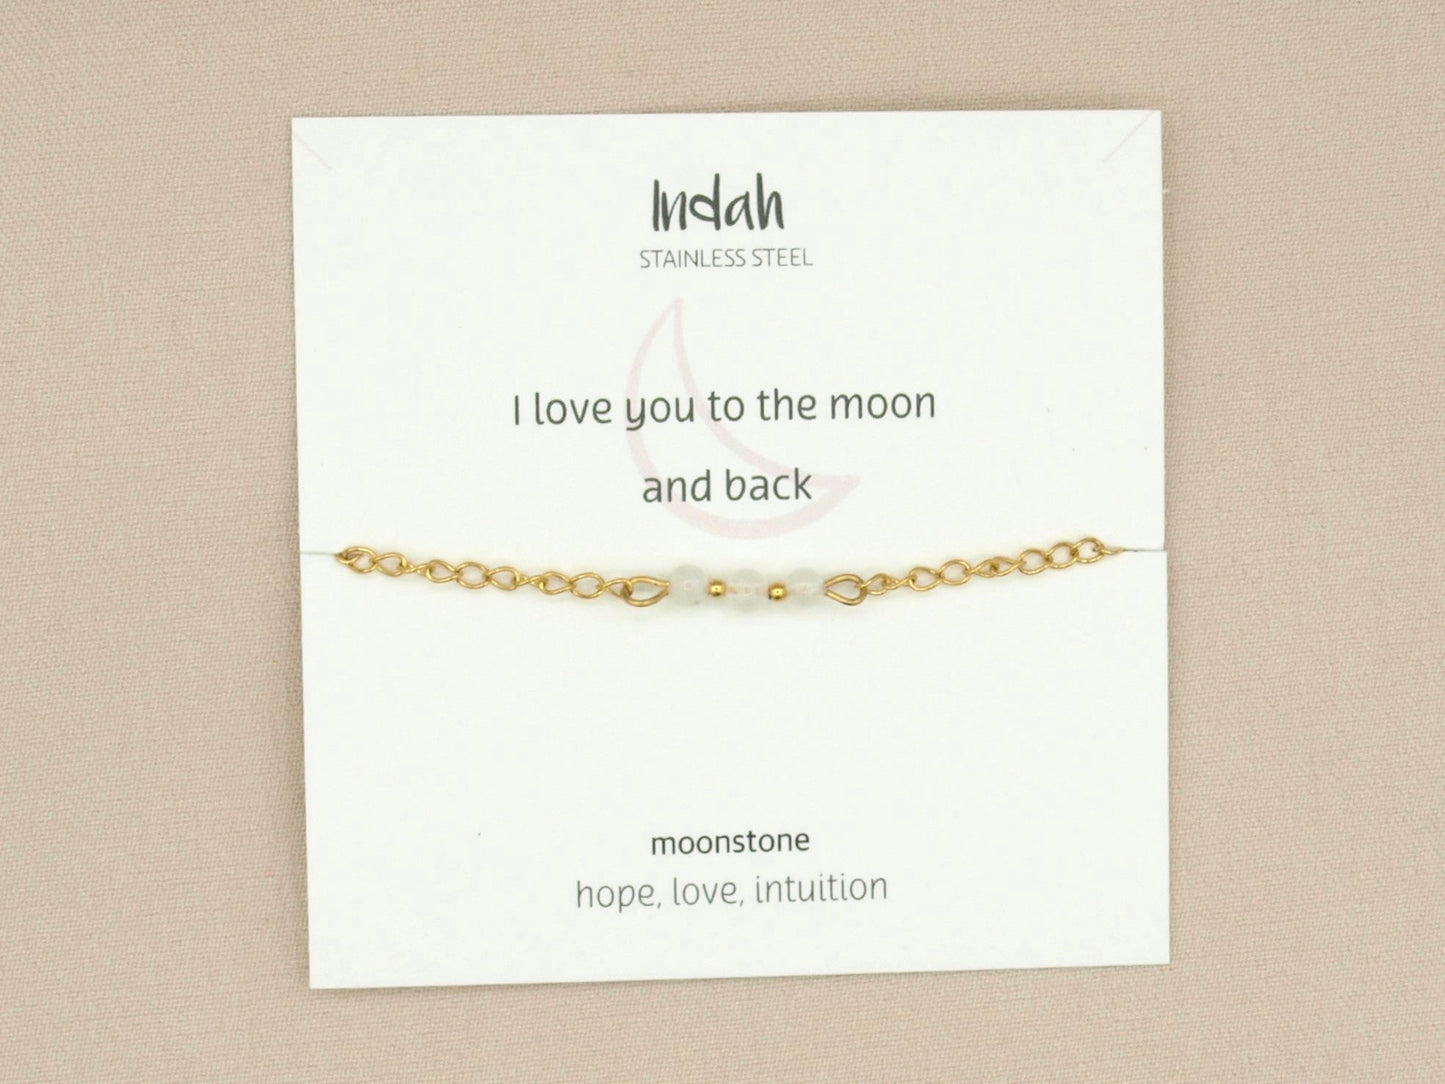 Necklace rock, moon-moonstone, silver and gold stainless steel